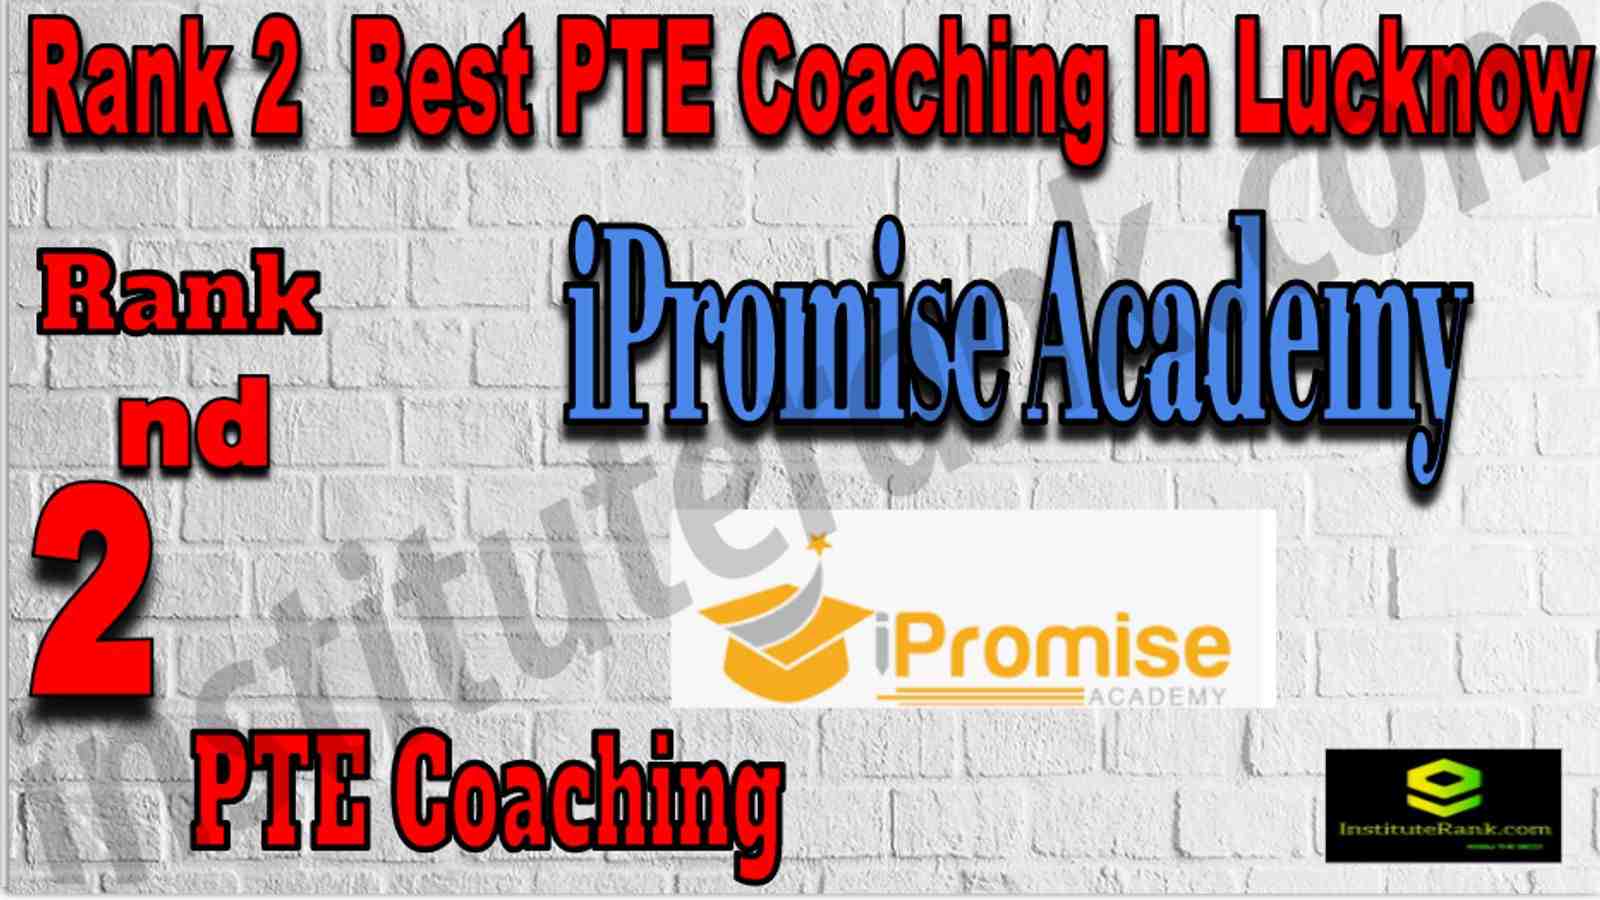 Rank 2 Best PTE Coaching In Lucknow